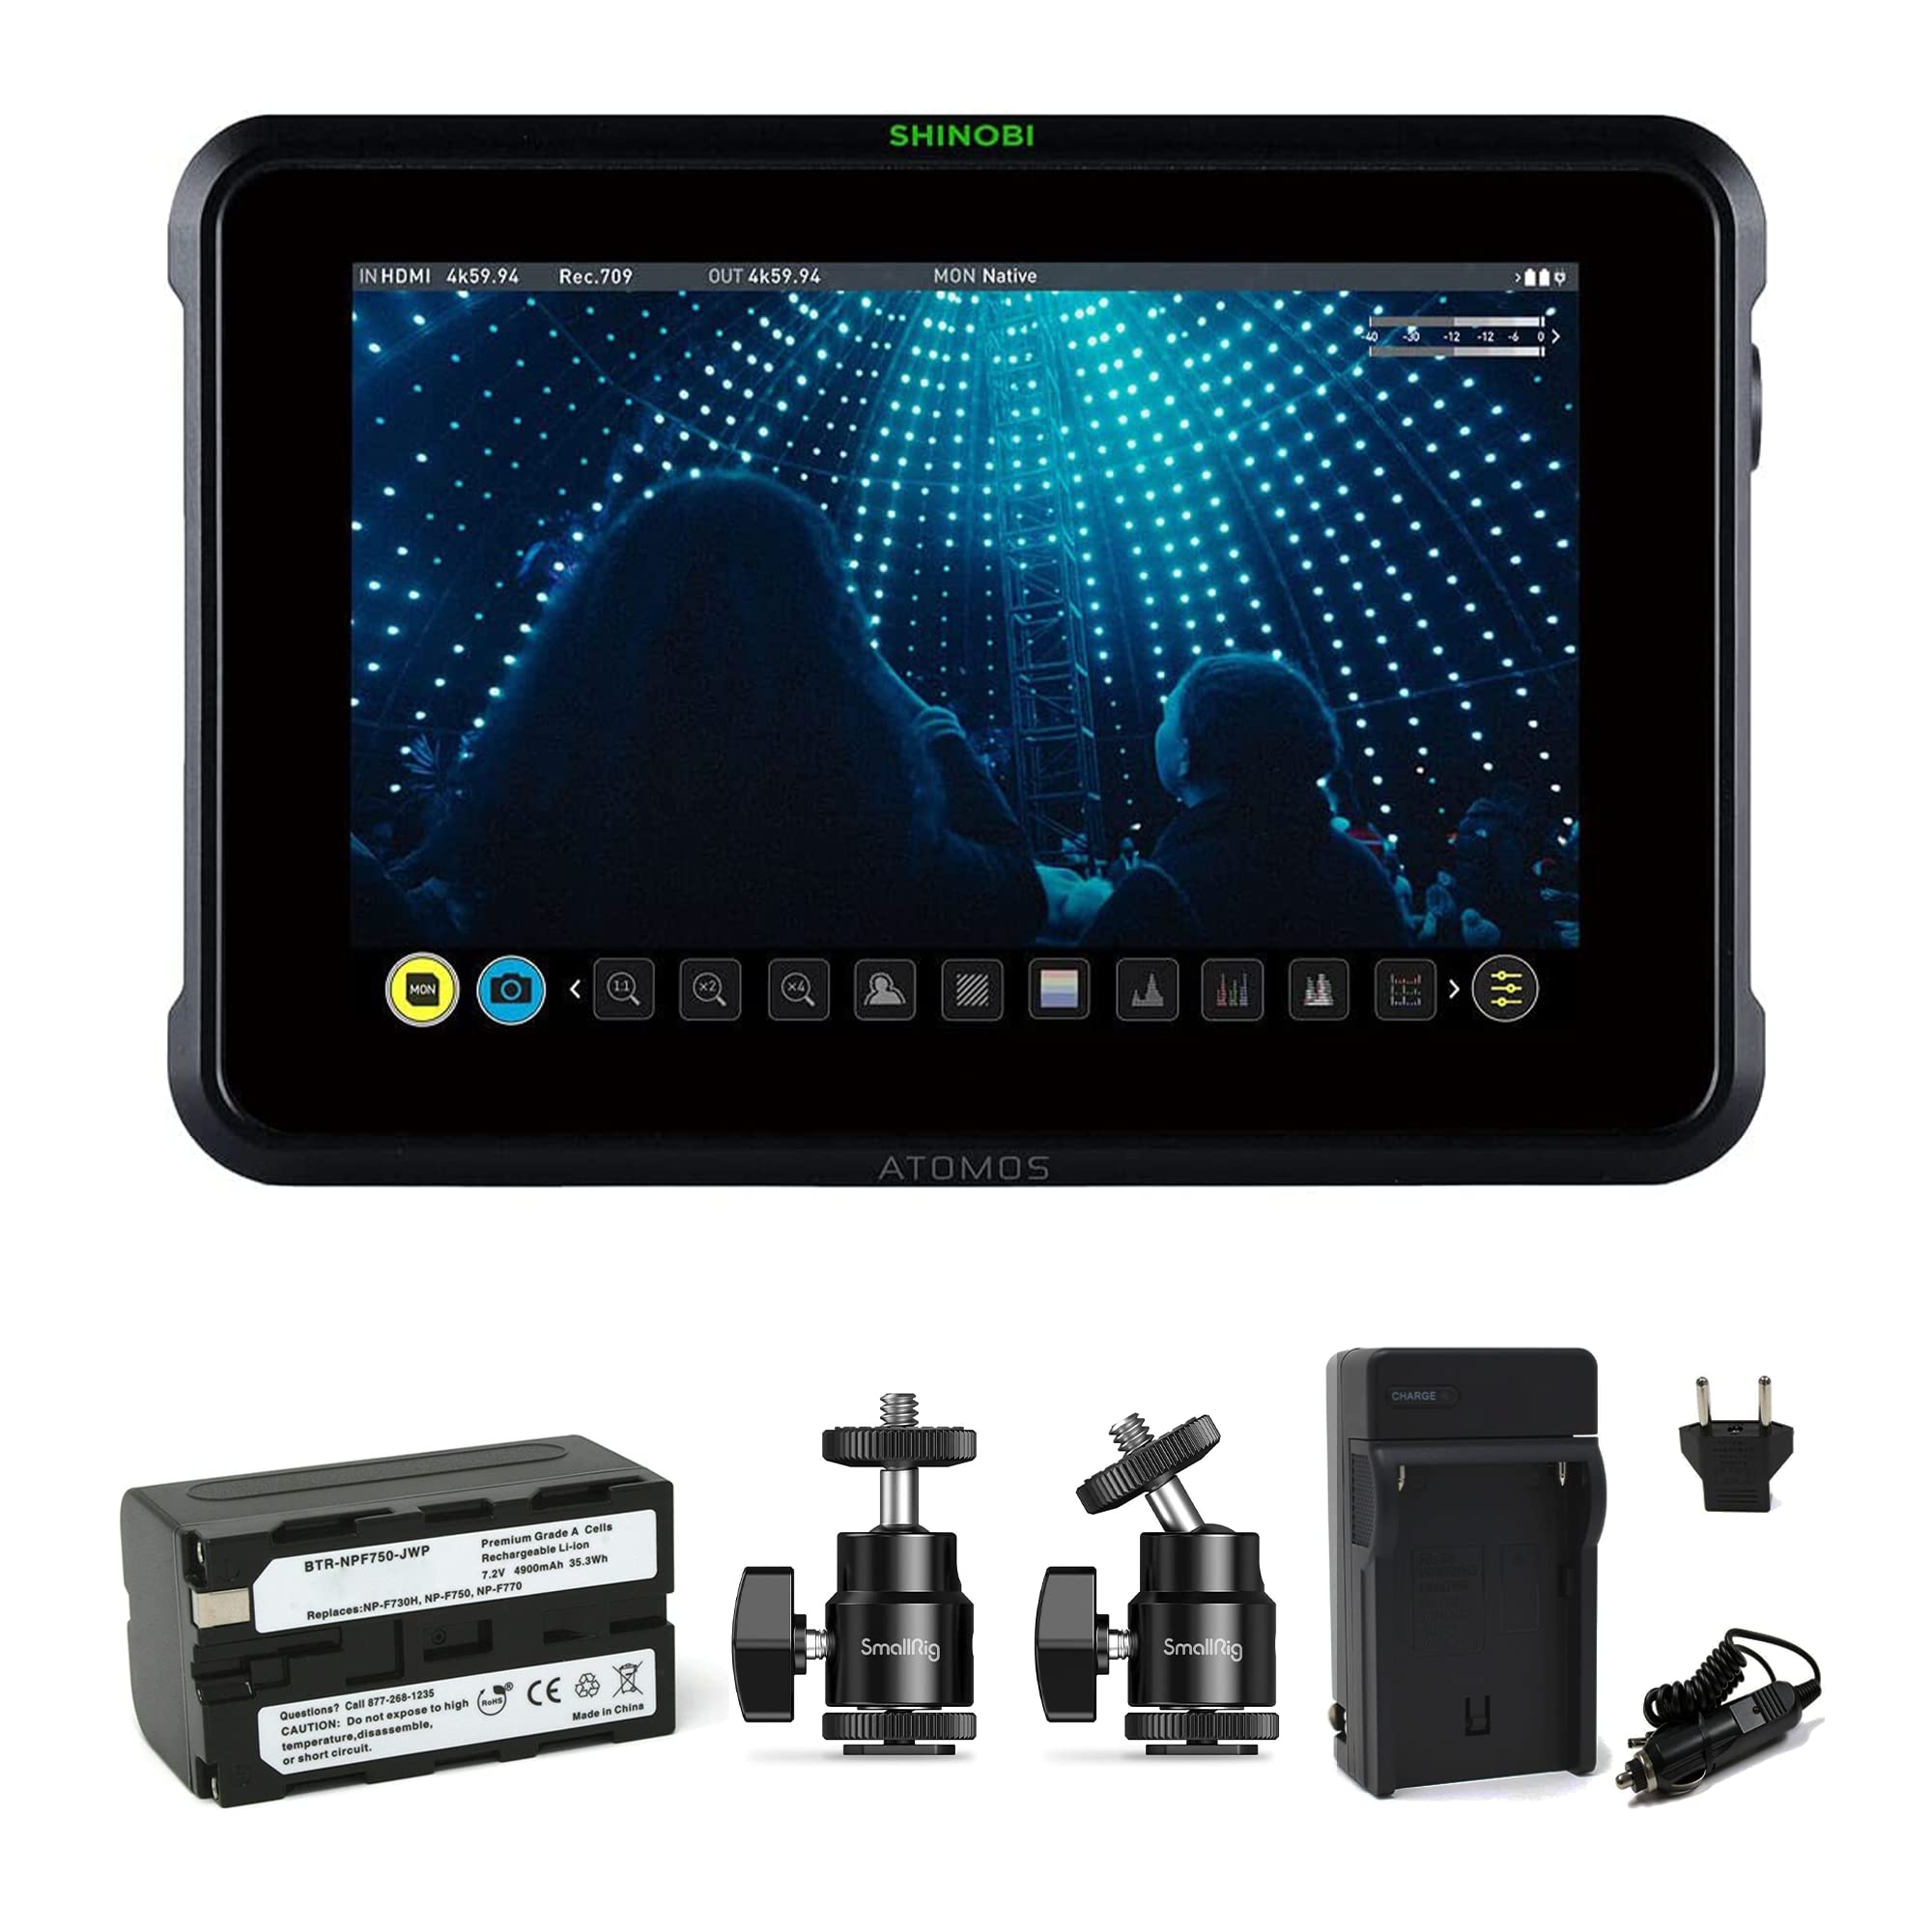 Atomos Shinobi 7-Inch 4K Photo and Video Portable Monitor | 1920 x 1200 Touchscreen Display Video Monitors with HDMI 2.0 in/Out | SmallRig Camera Hot Shoe Mount, Battery & Charger Bundle Set